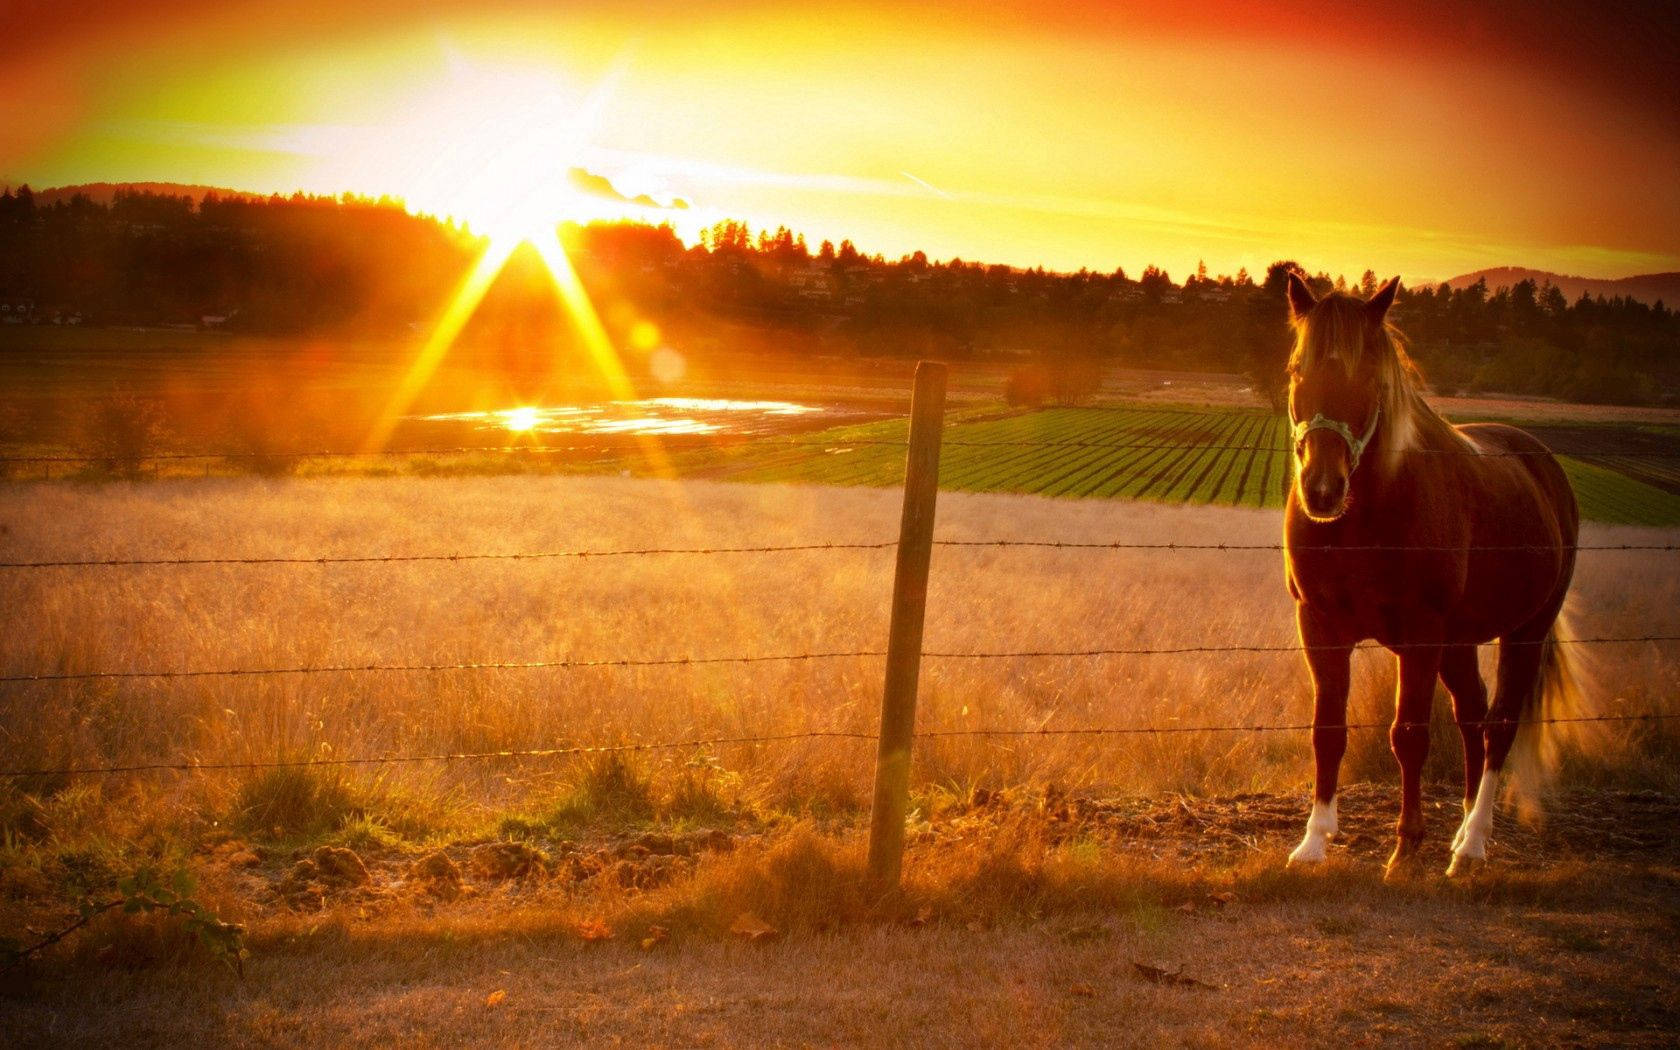 Fenced Horse In Sunset Background